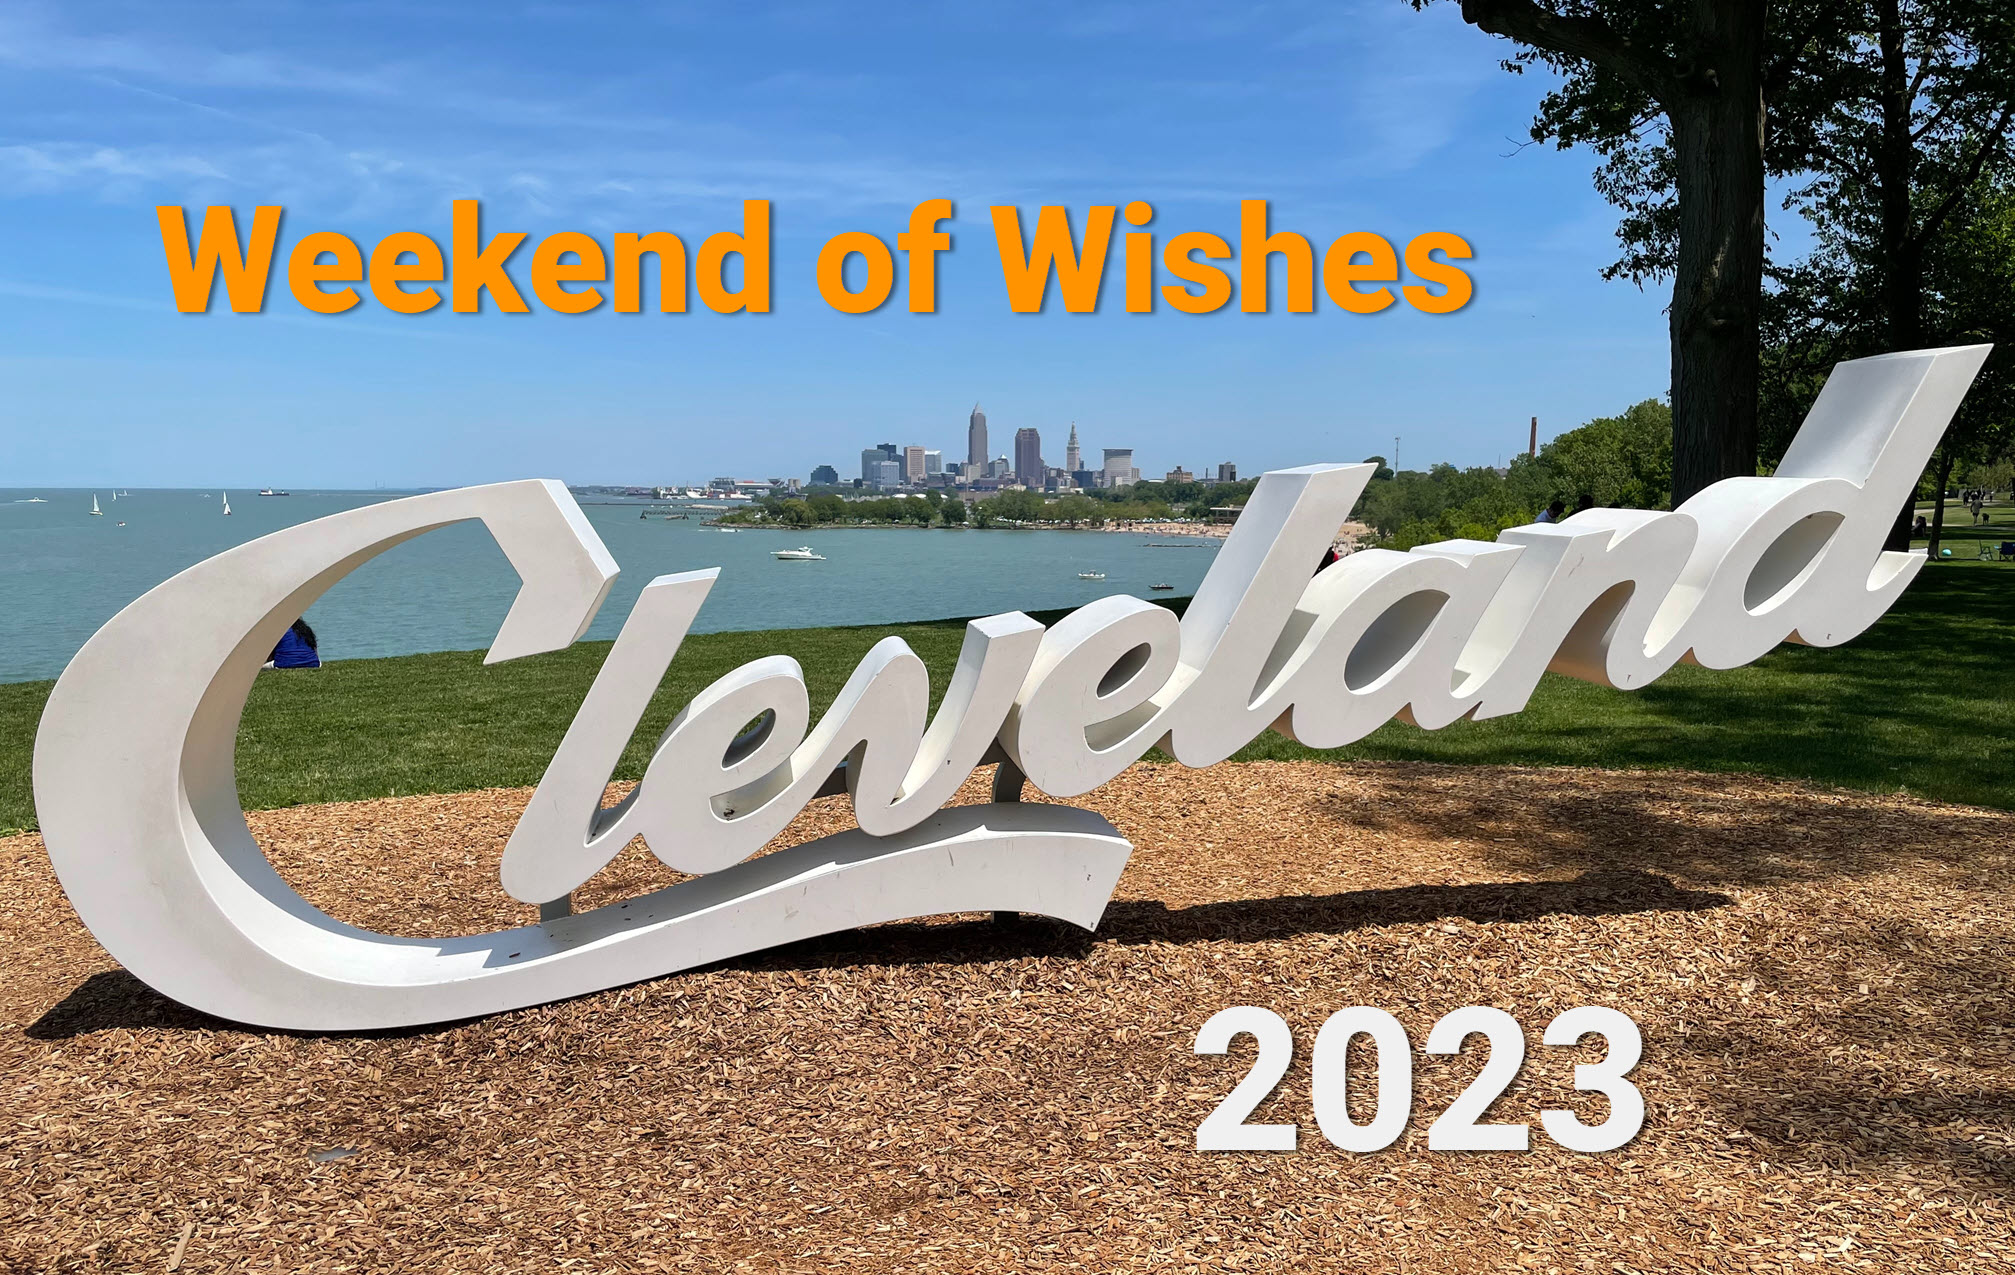 Weekend of Wishes, Cleveland 2023 over a view of downtown from the lakefront